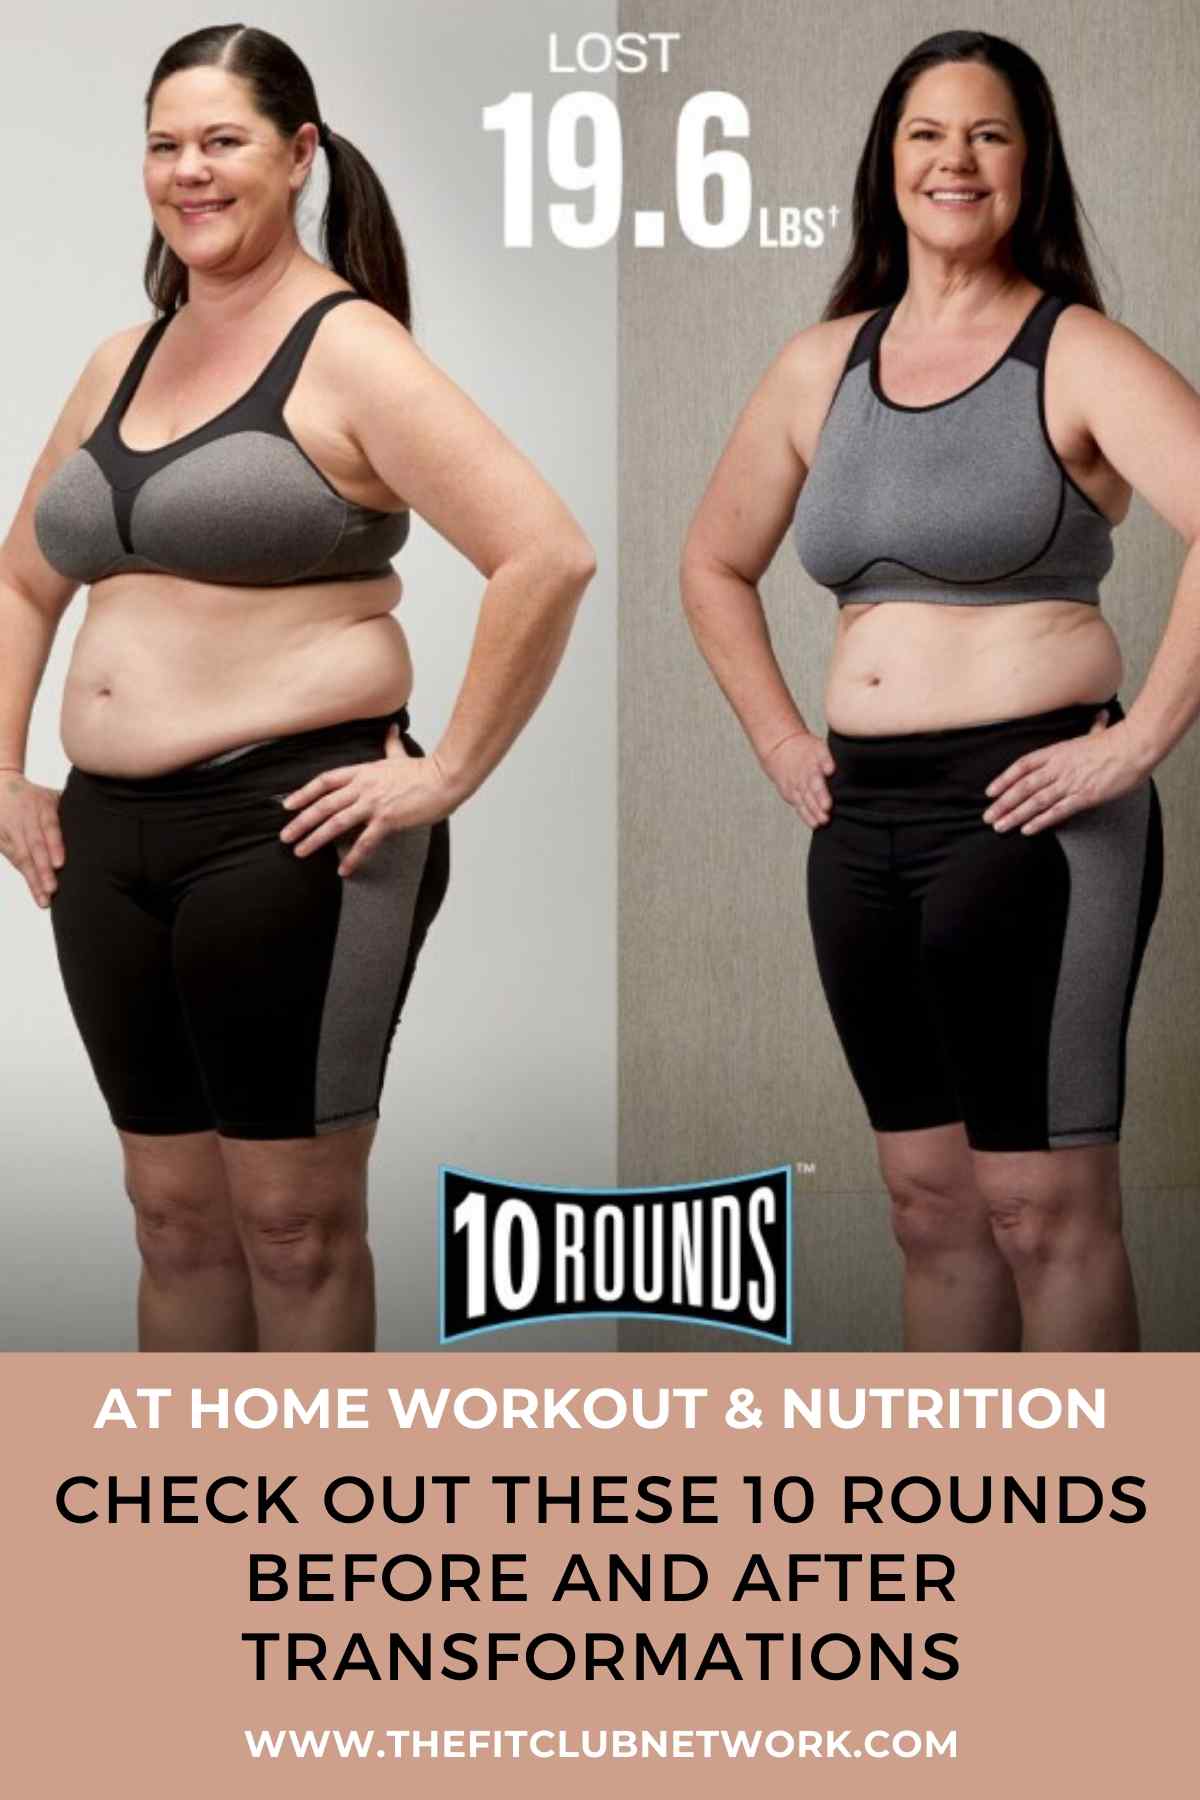 10 ROUNDS BEFORE AND AFTER & WEEK 6 OF 10 ROUNDS TOUR IN PHILADELPHIA | THEFITCLUBNETWORK.COM